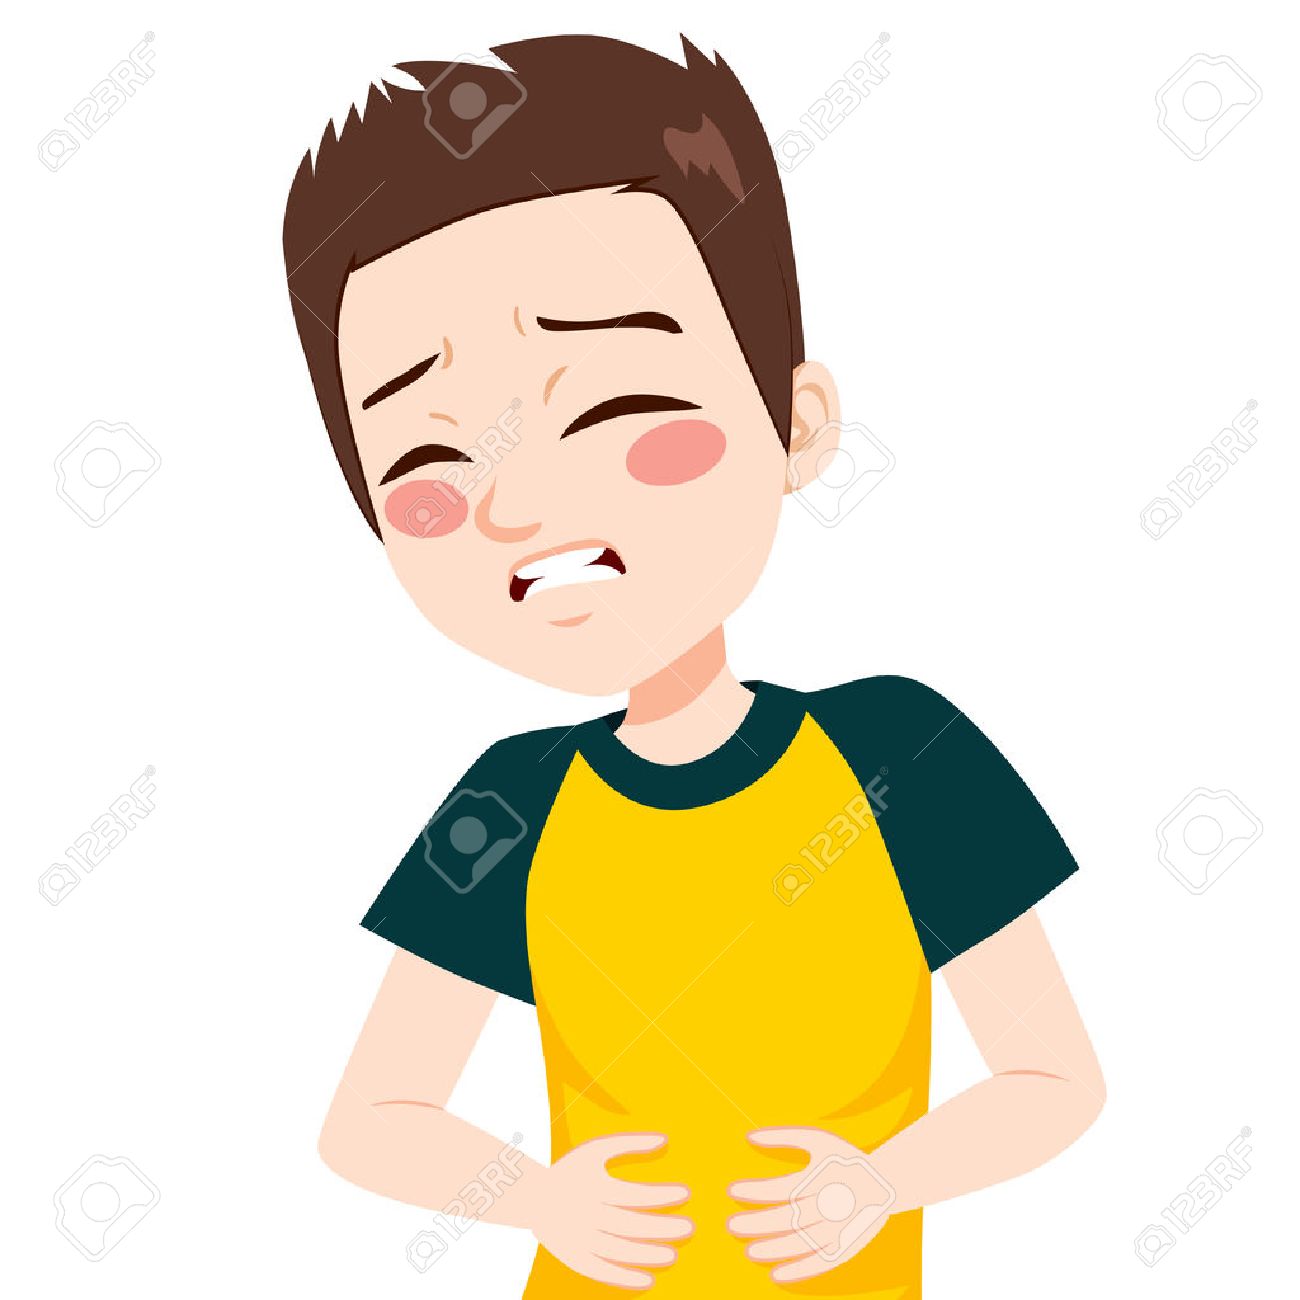 Stomach pain clipart 7 » Clipart Station.